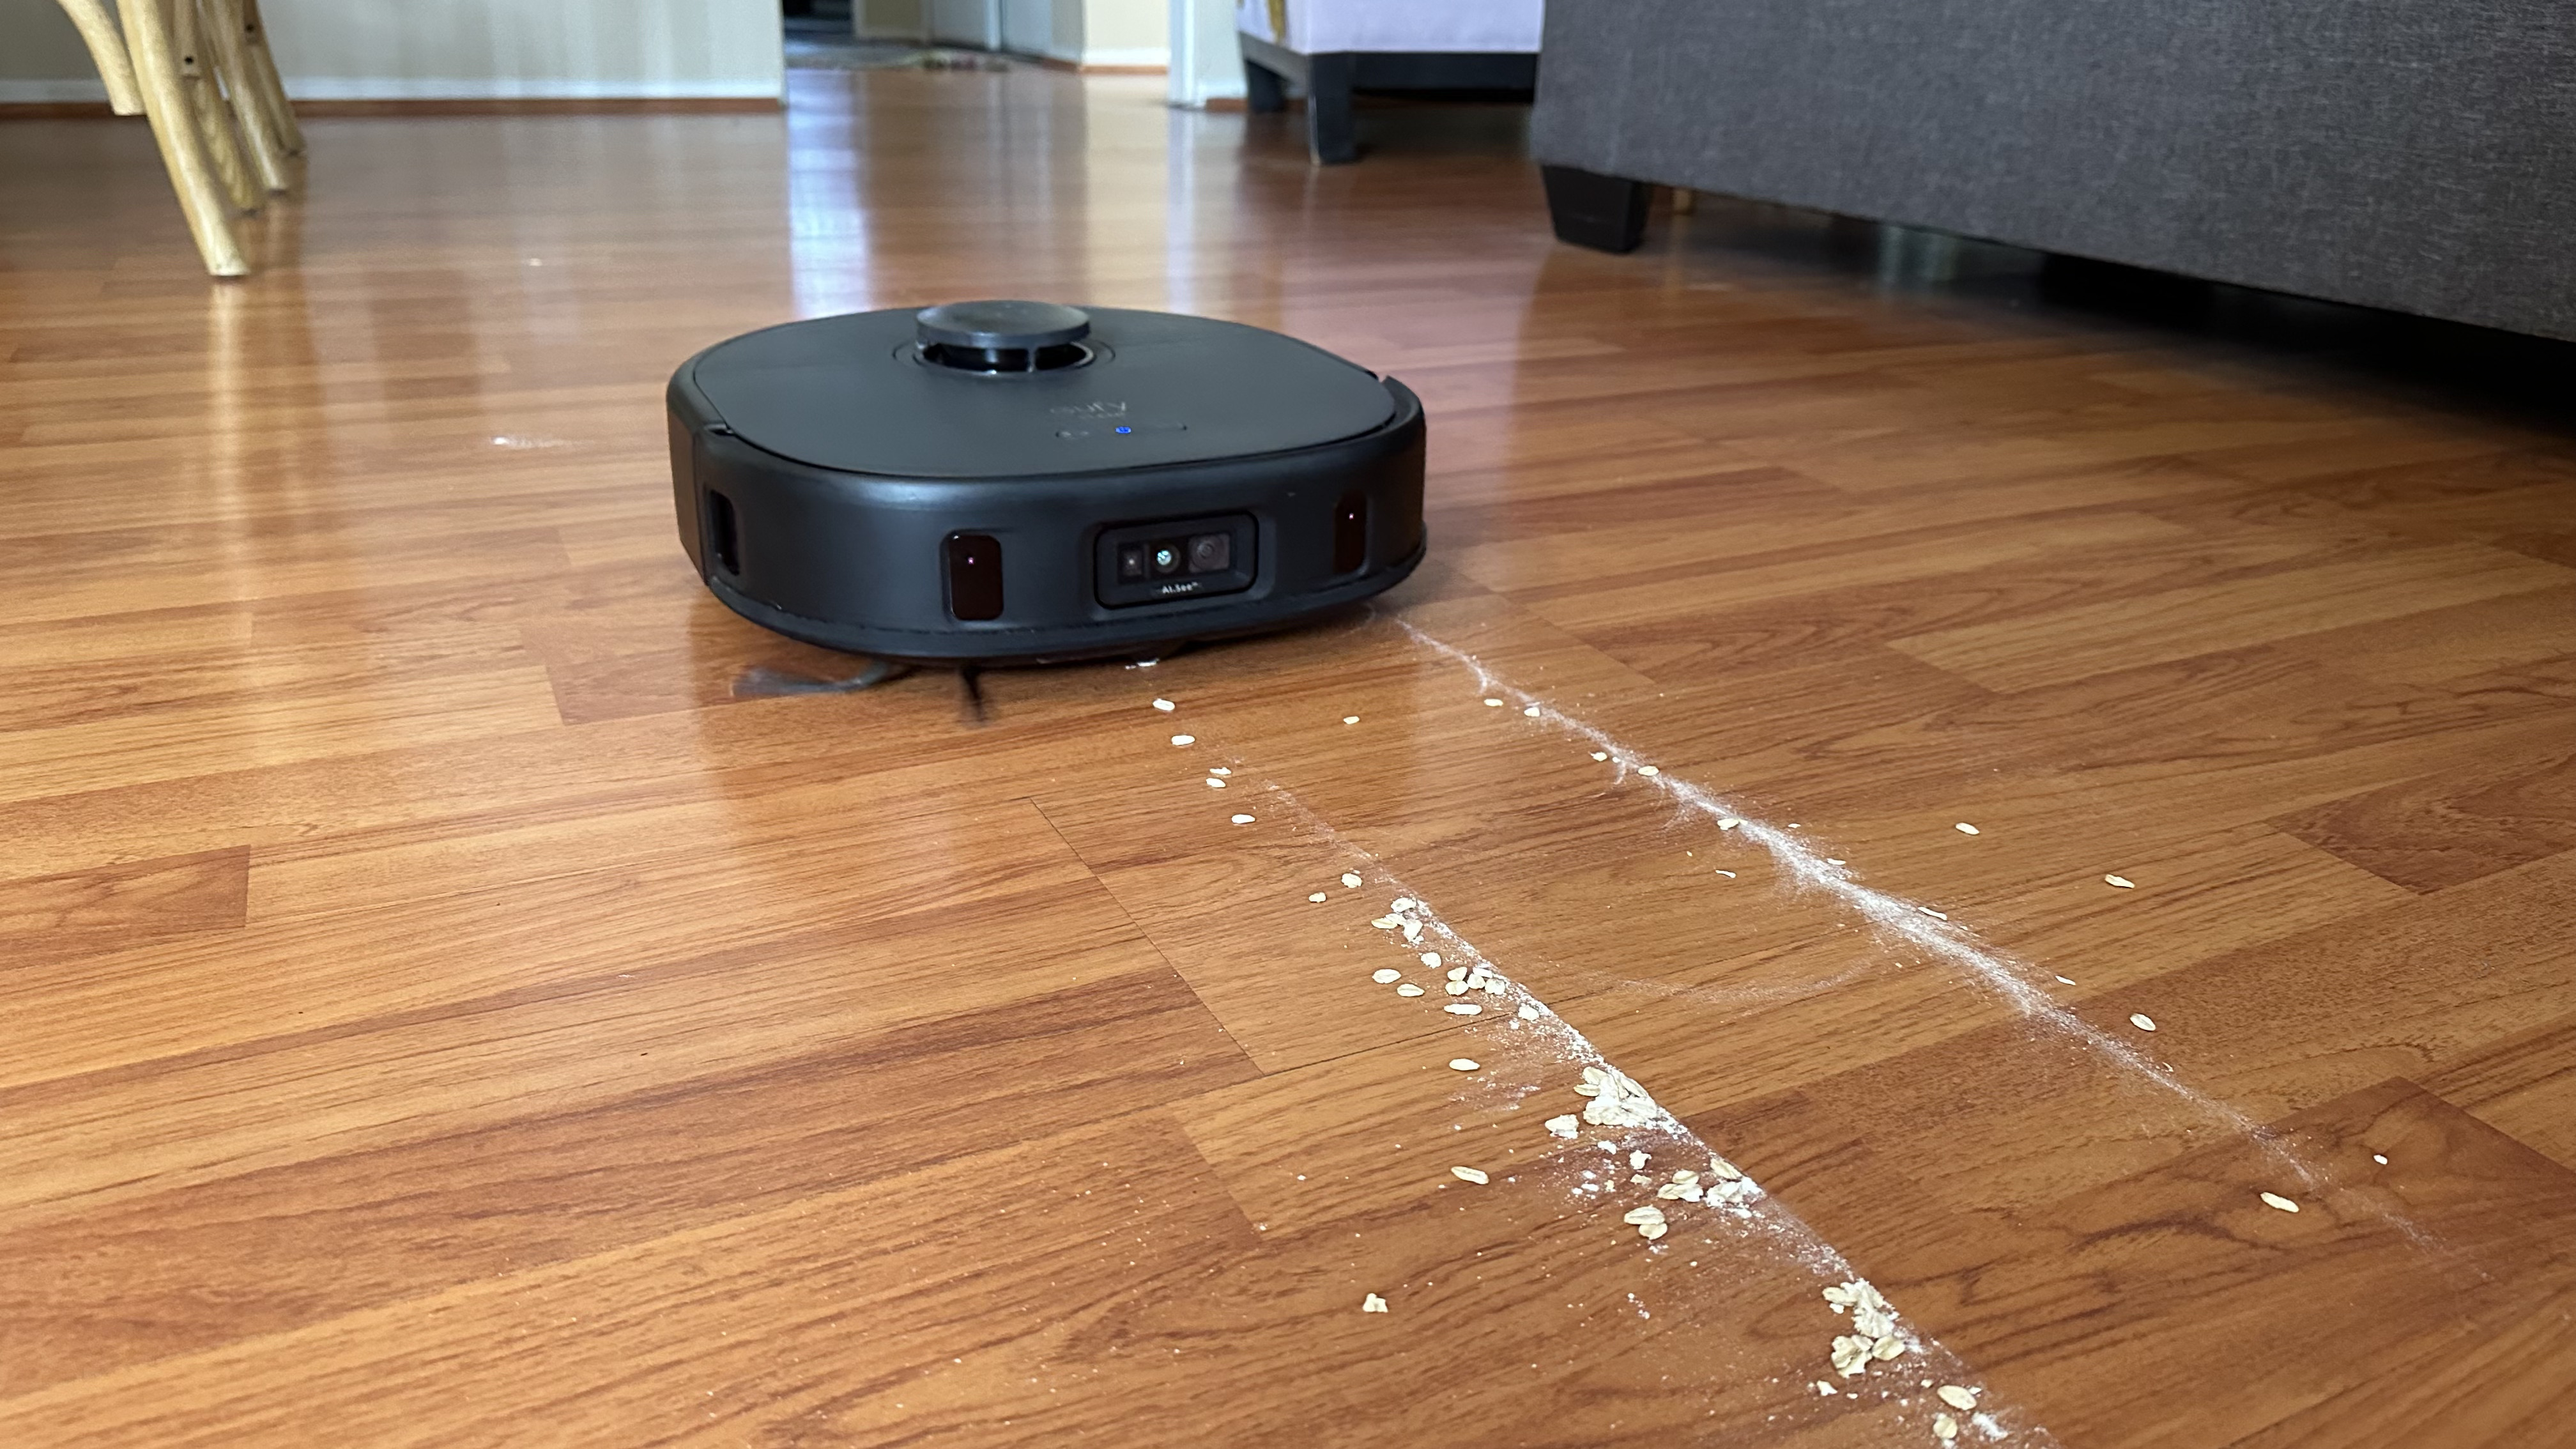 Eufy X9 pro attempting to clean up oats and flour